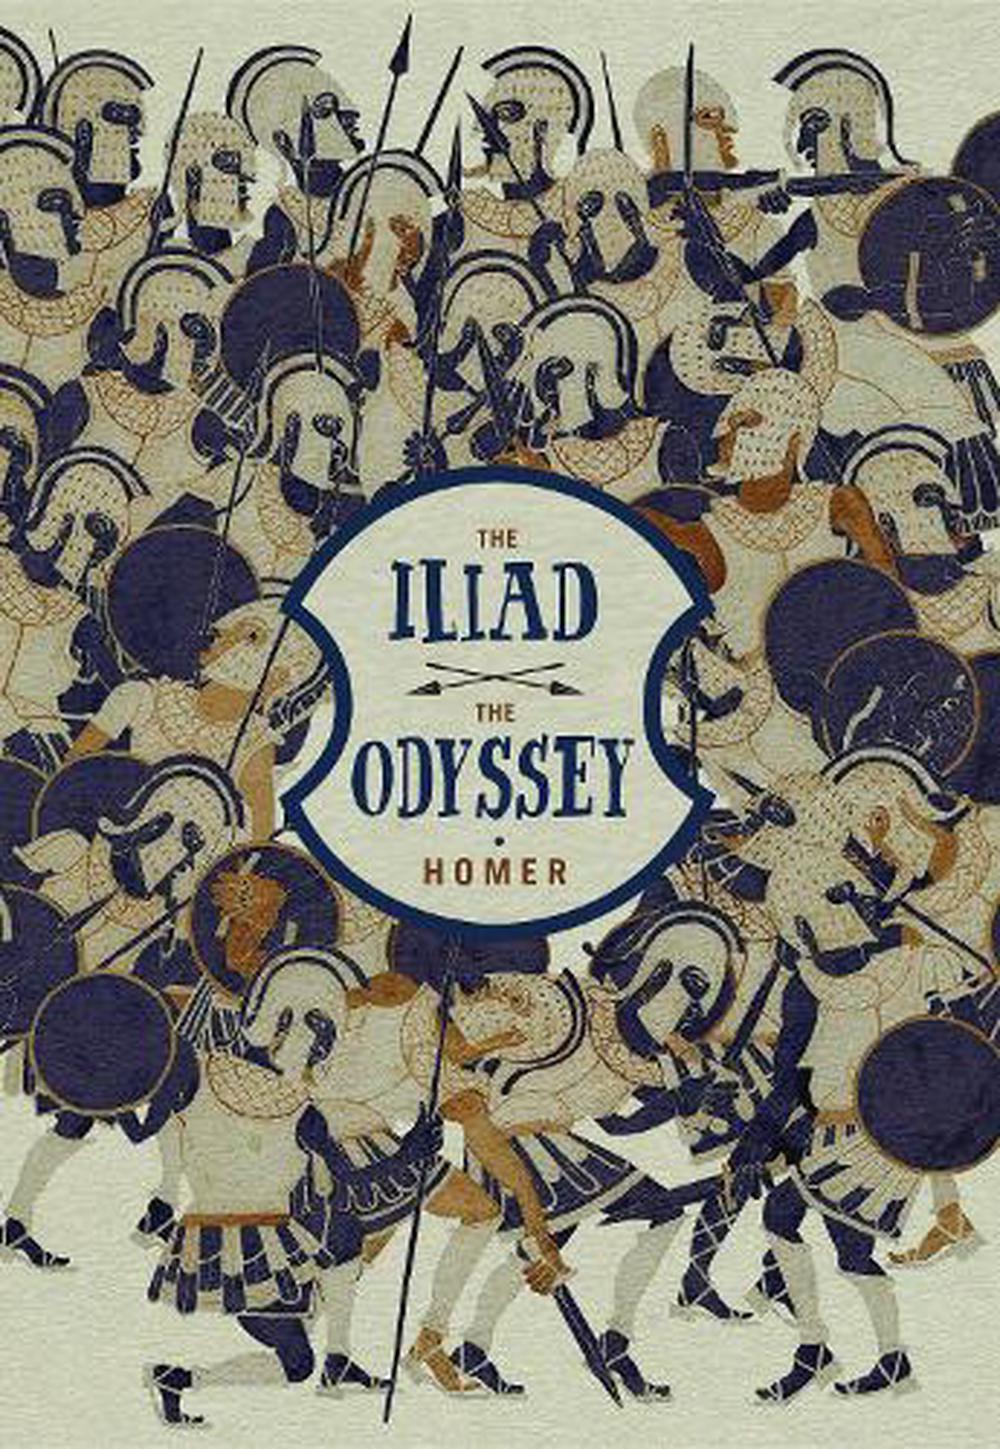 story of the iliad and odyssey